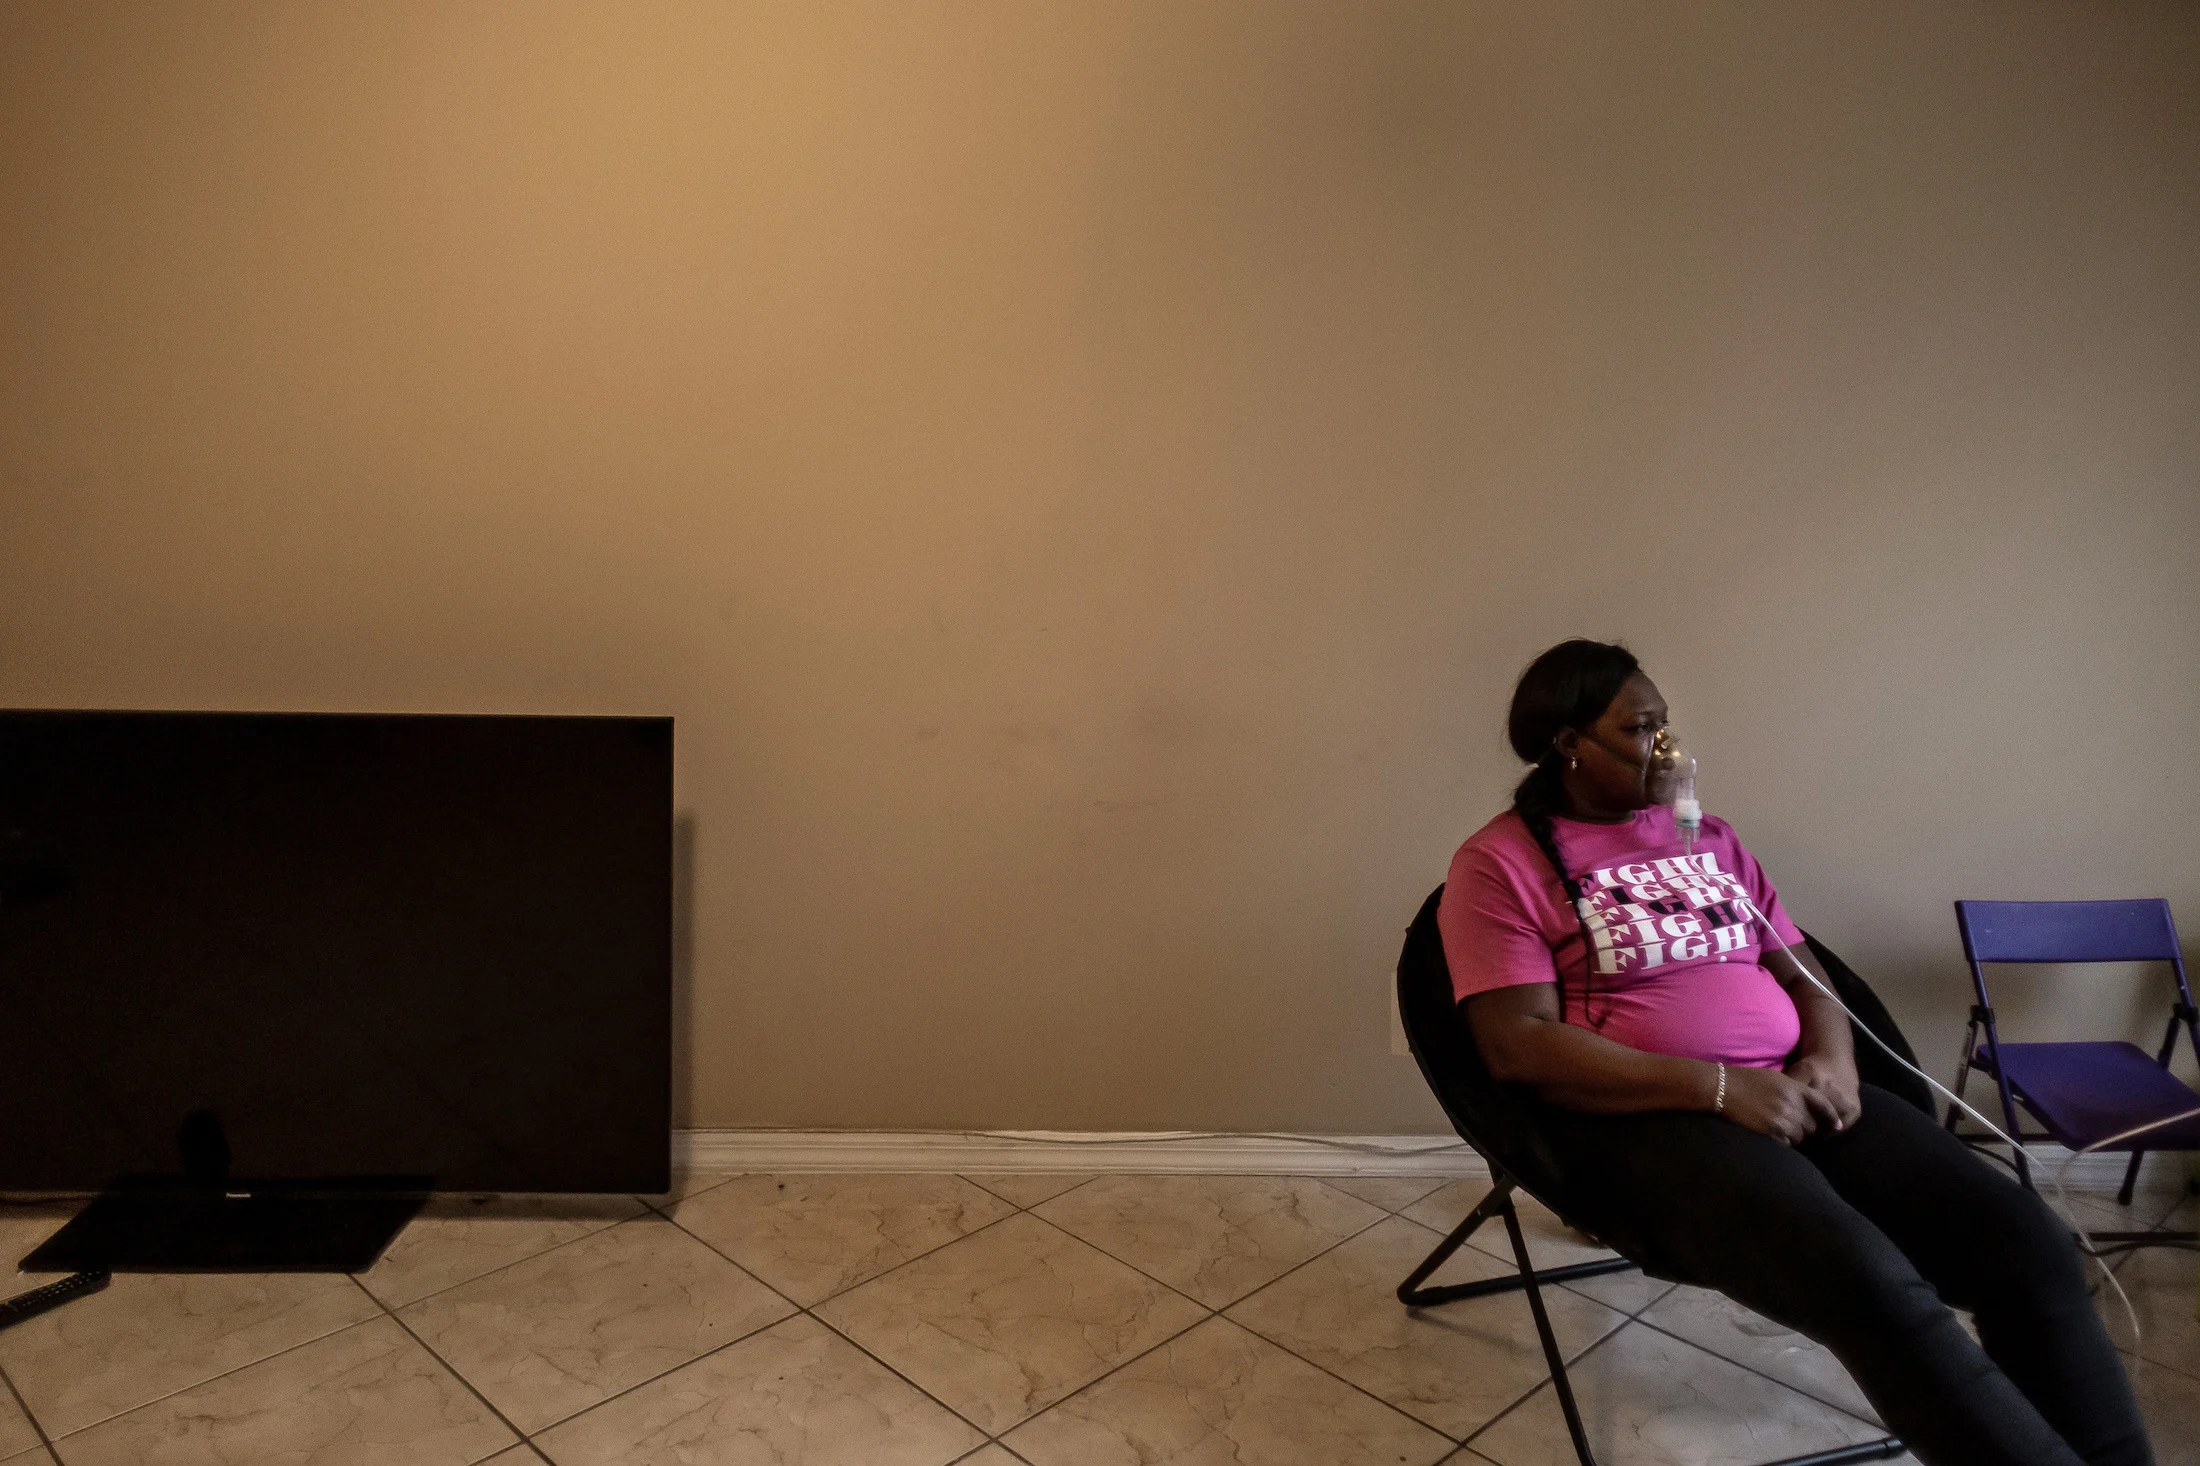 A woman sits on the right side of the photo, wearing the same nebulizer mask from the previous image. She's in front of a blank wall, and a television sits on the floor on the left side of the photo. The woman is wearing a pink T-shirt reading, "FIGHT FIGHT FIGHT FIGHT FIGHT."